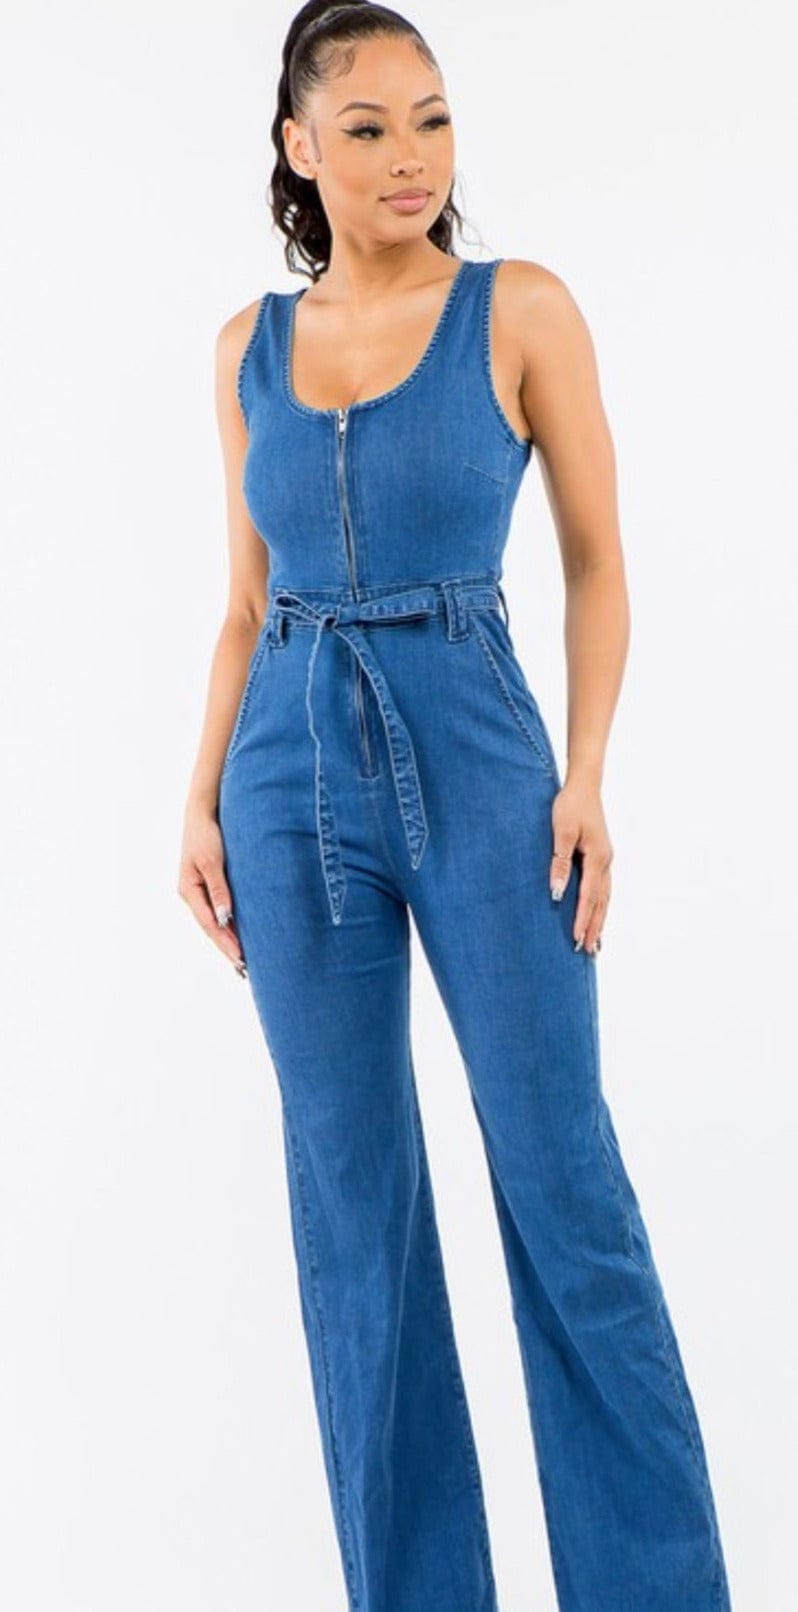 "Denim Diva: A Blue Jean Jumpsuit for a Sassy and Chic Look"